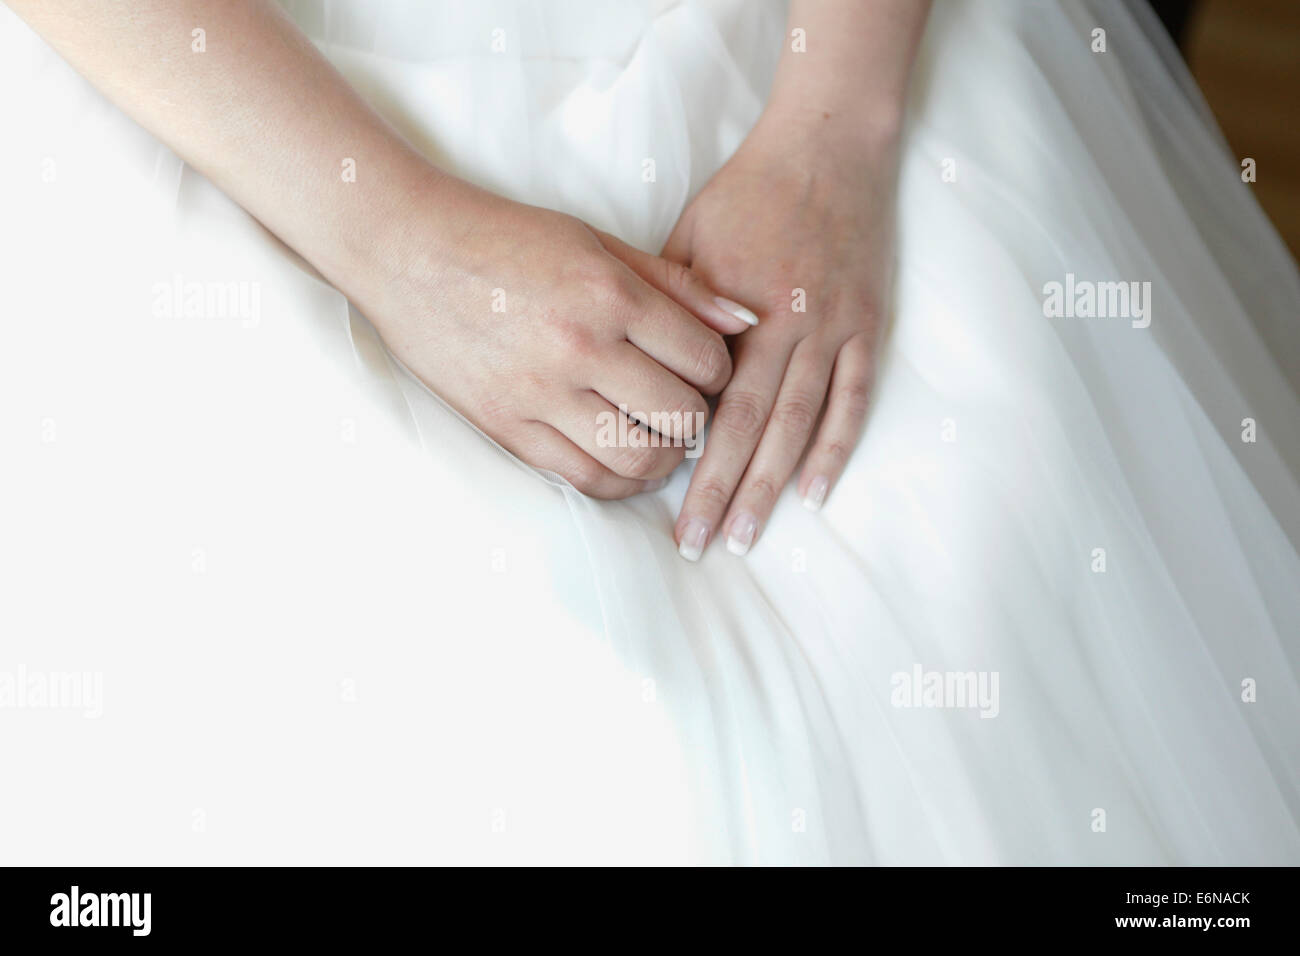 hands of the bride lying on the bridal gown Stock Photo